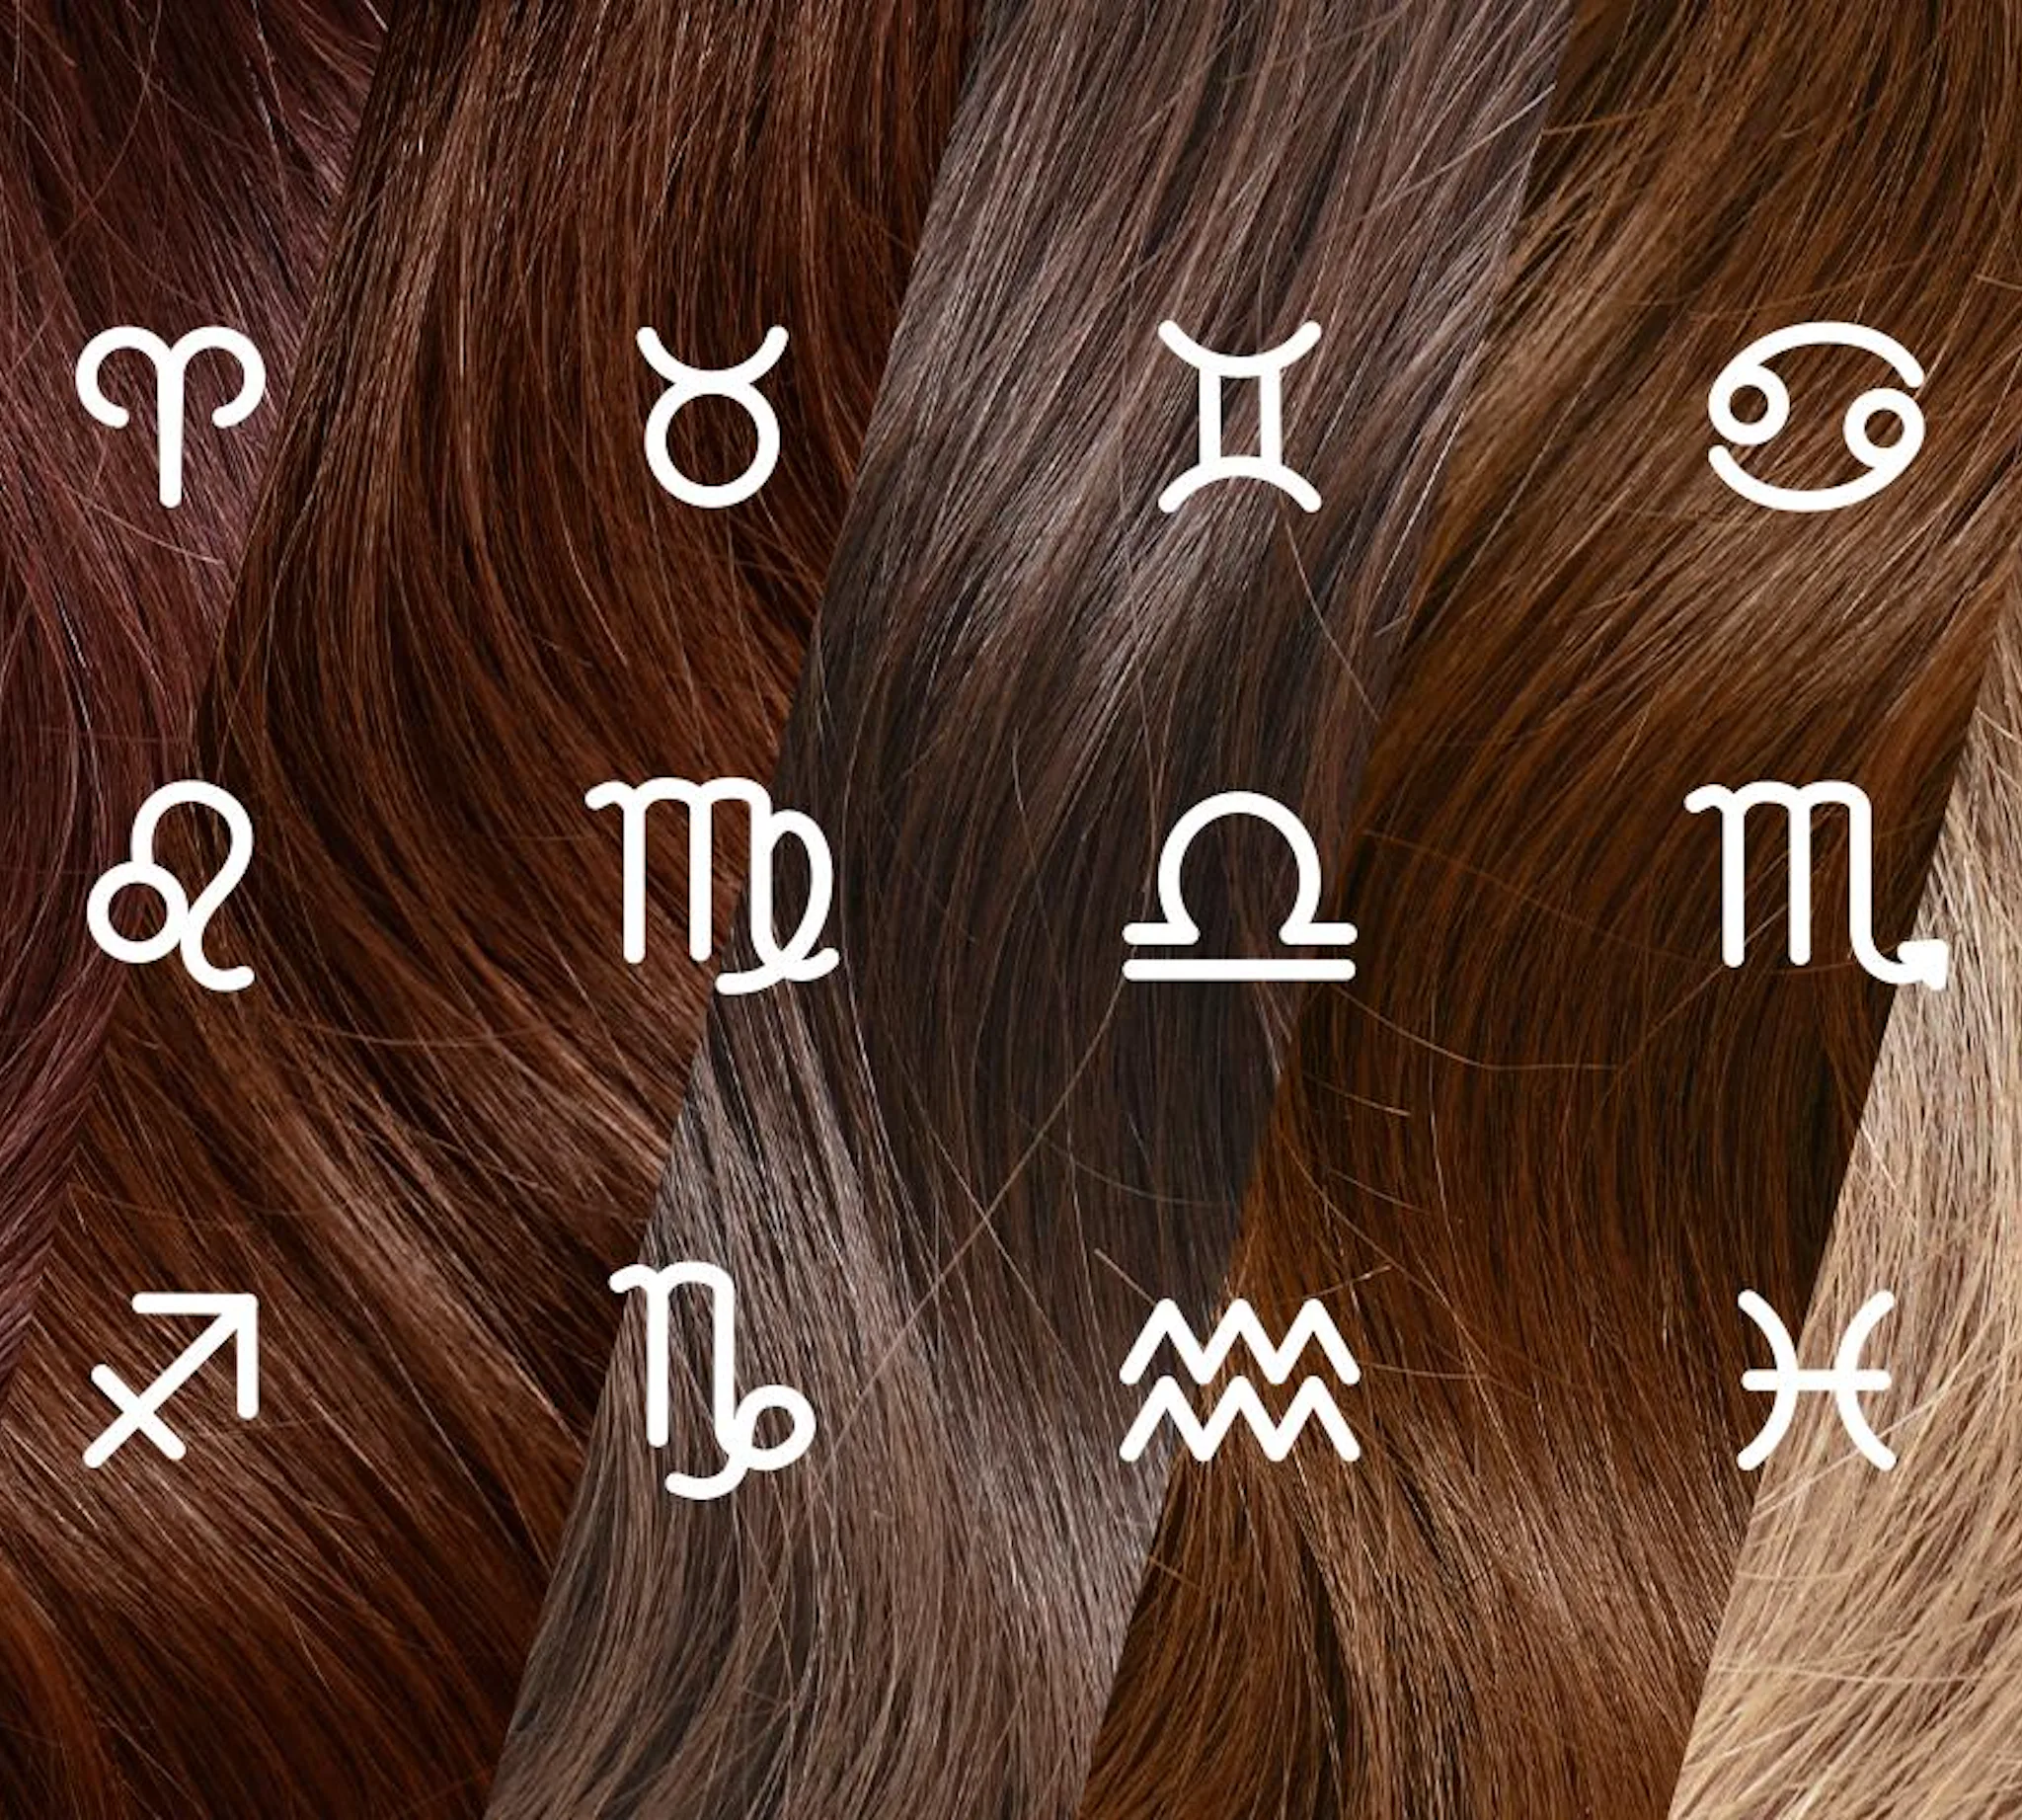 If your zodiac sign was a hairstyle